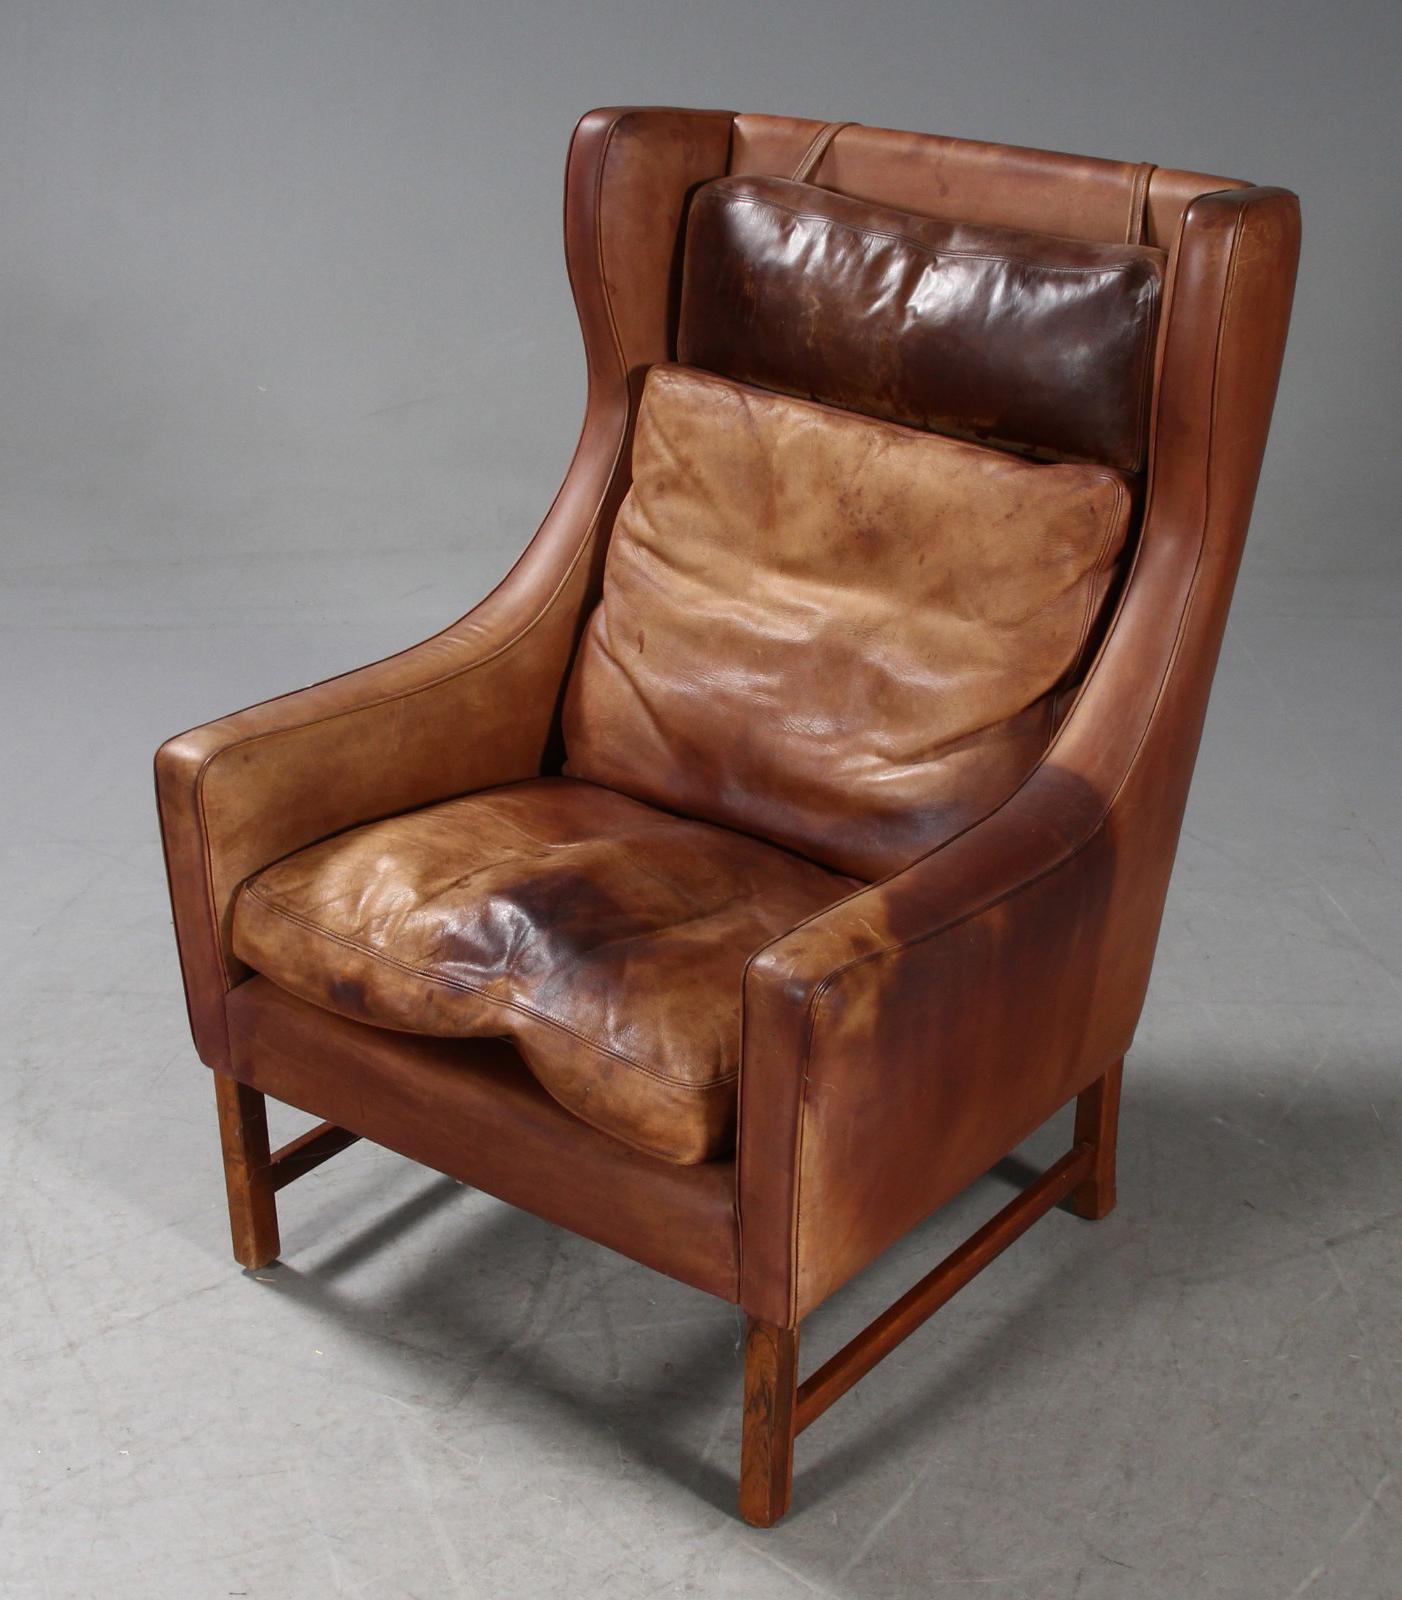 Norwegian Frederik A. Kayser Wingback Chair Upholstered in Cognac-Ccolored Leather For Sale